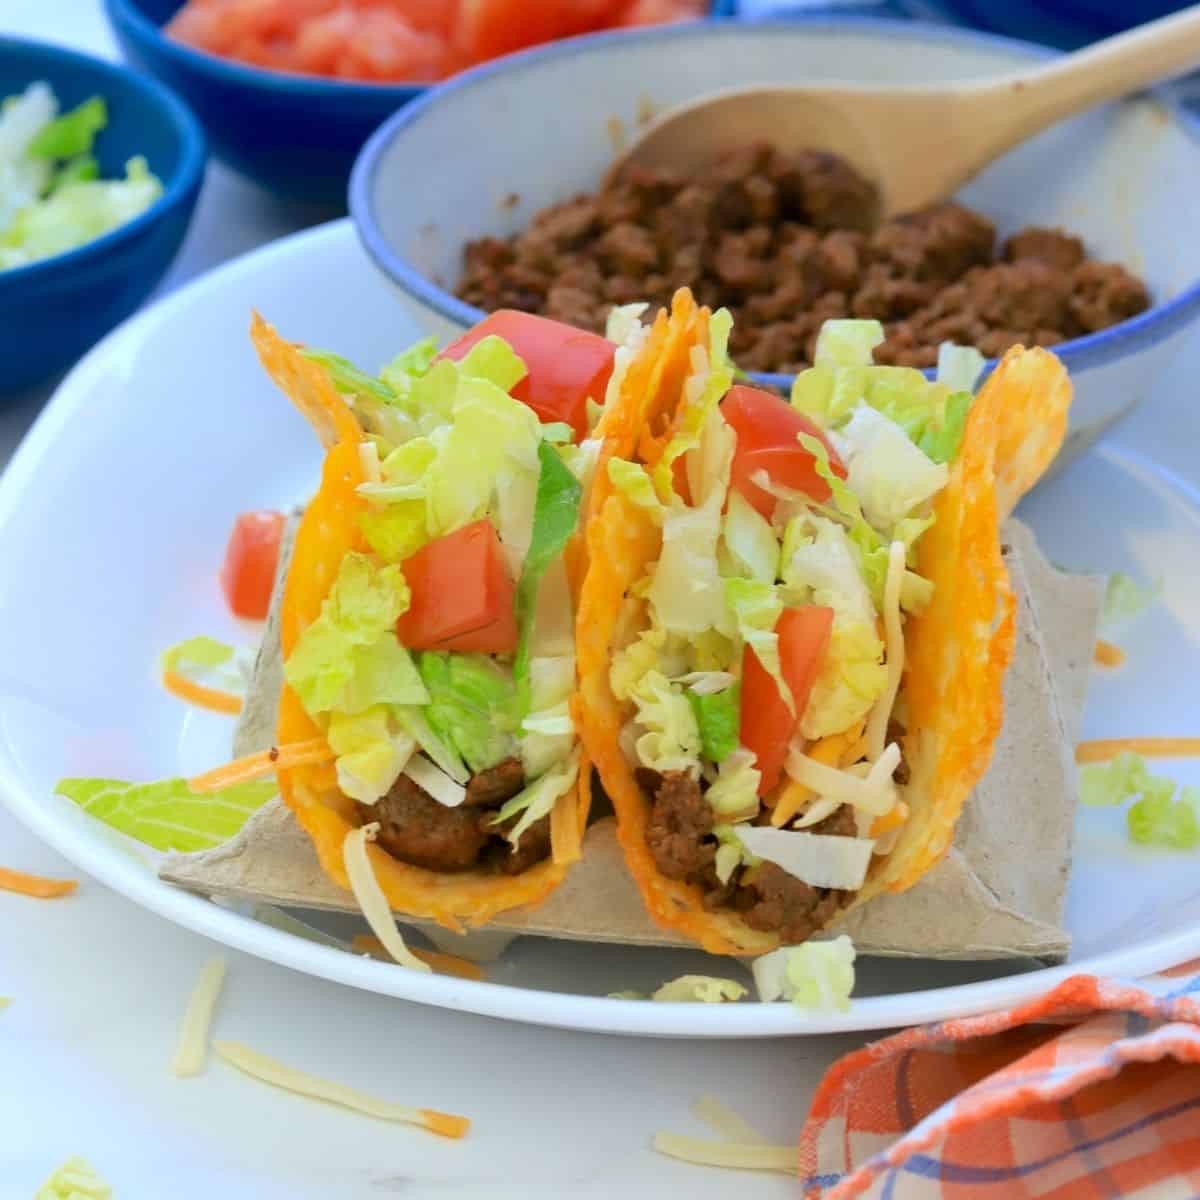 2 keto beef tacos with toppings and side dishes of ground beef, diced tomatoes, shredded lettuce and cheese.